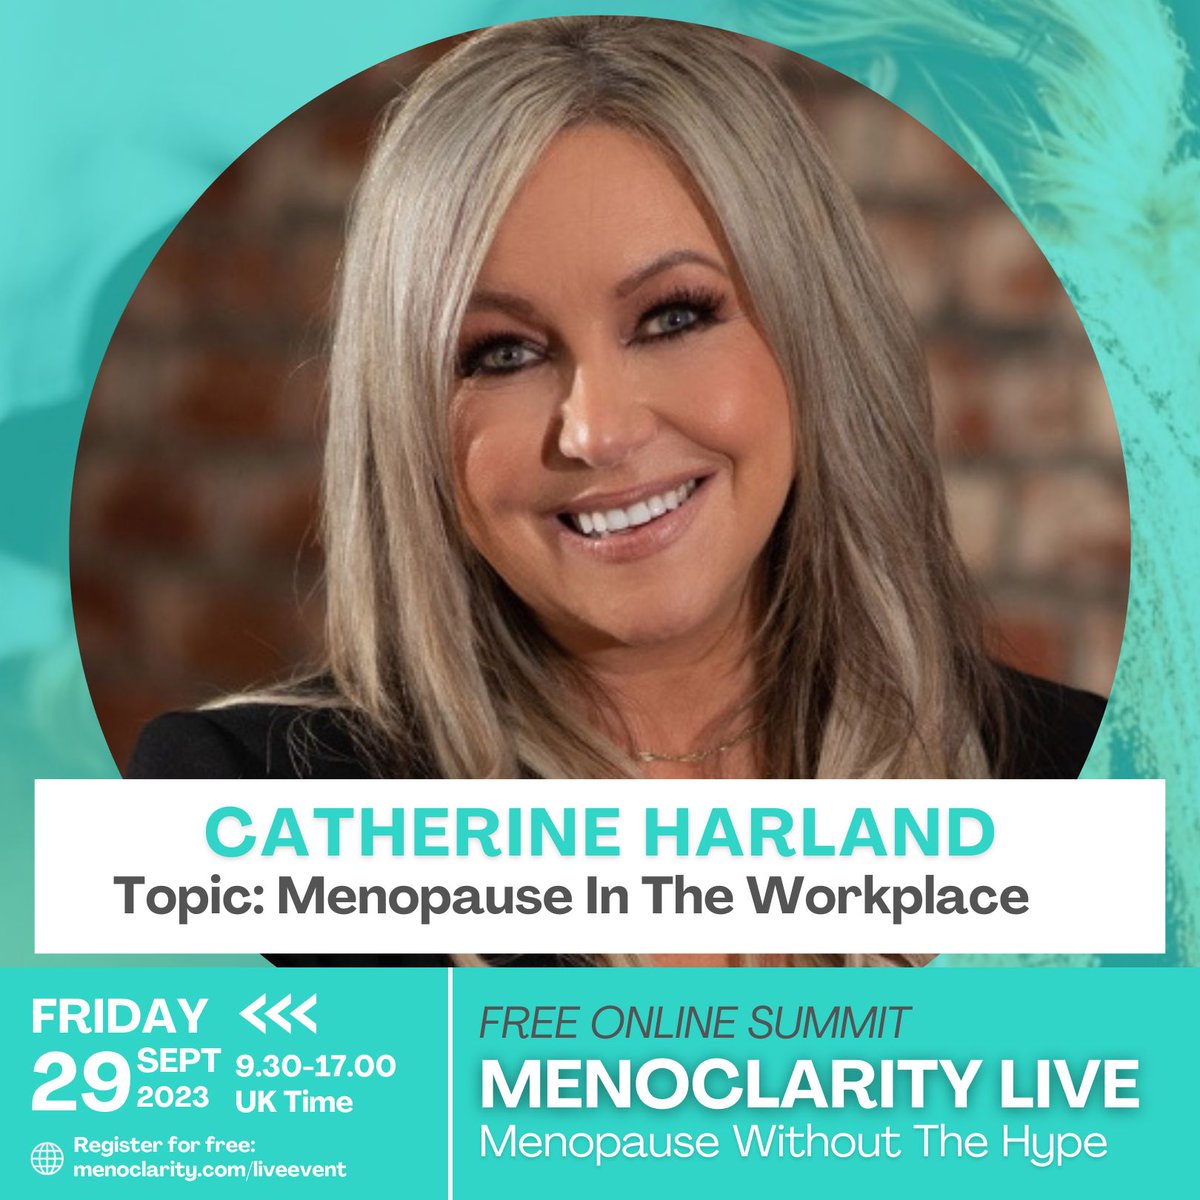 Featuring the wonderful speakers at our free online summit, MenoClarity Live. Register: menoclarity.com/liveevent
@meno_mentor #CatherineHarland #menopauseintheworkplace #menopausesummit #freeevent